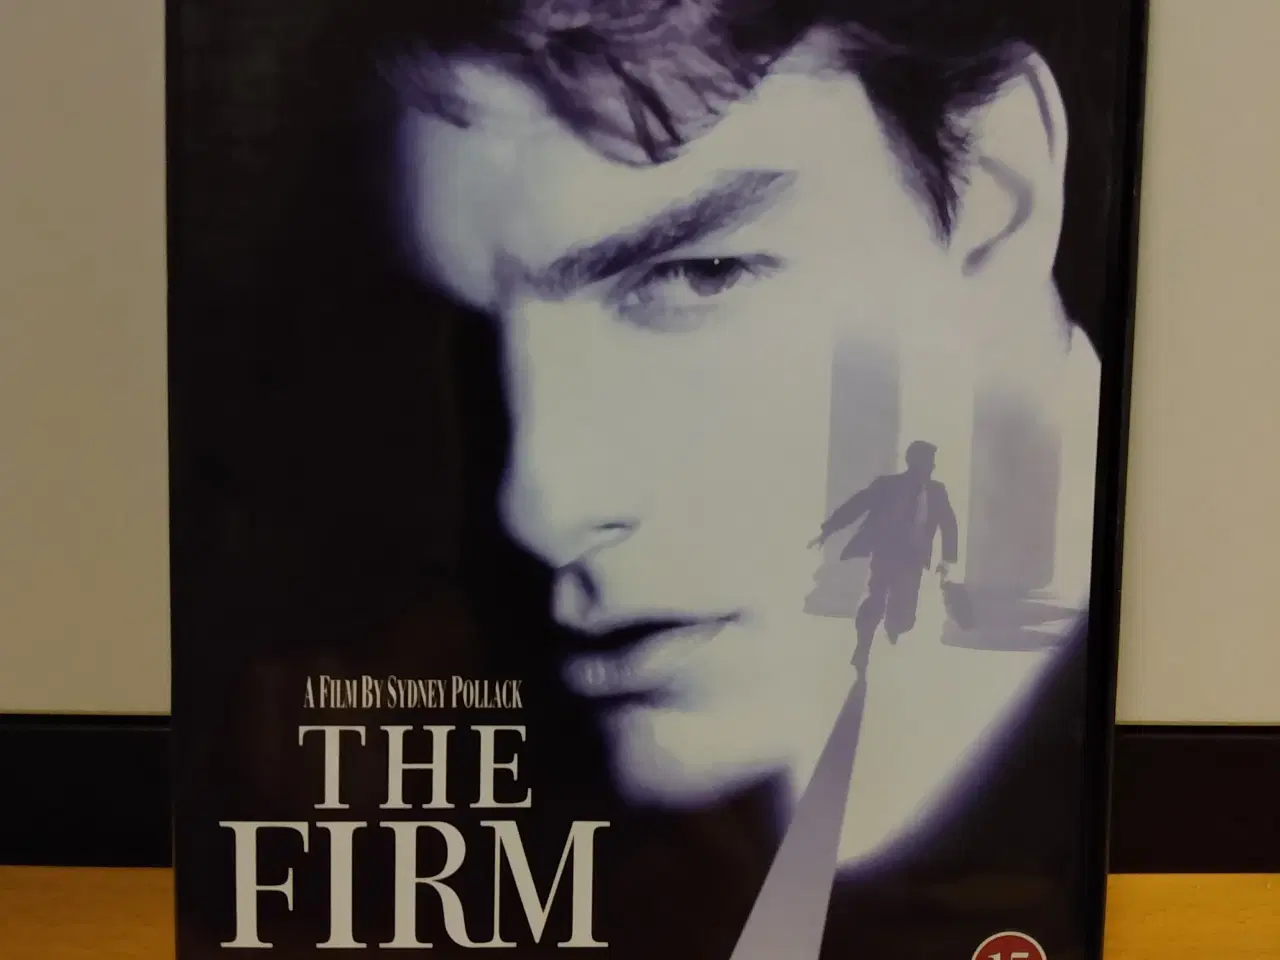 Billede 1 - The Firm (Tom Cruise)